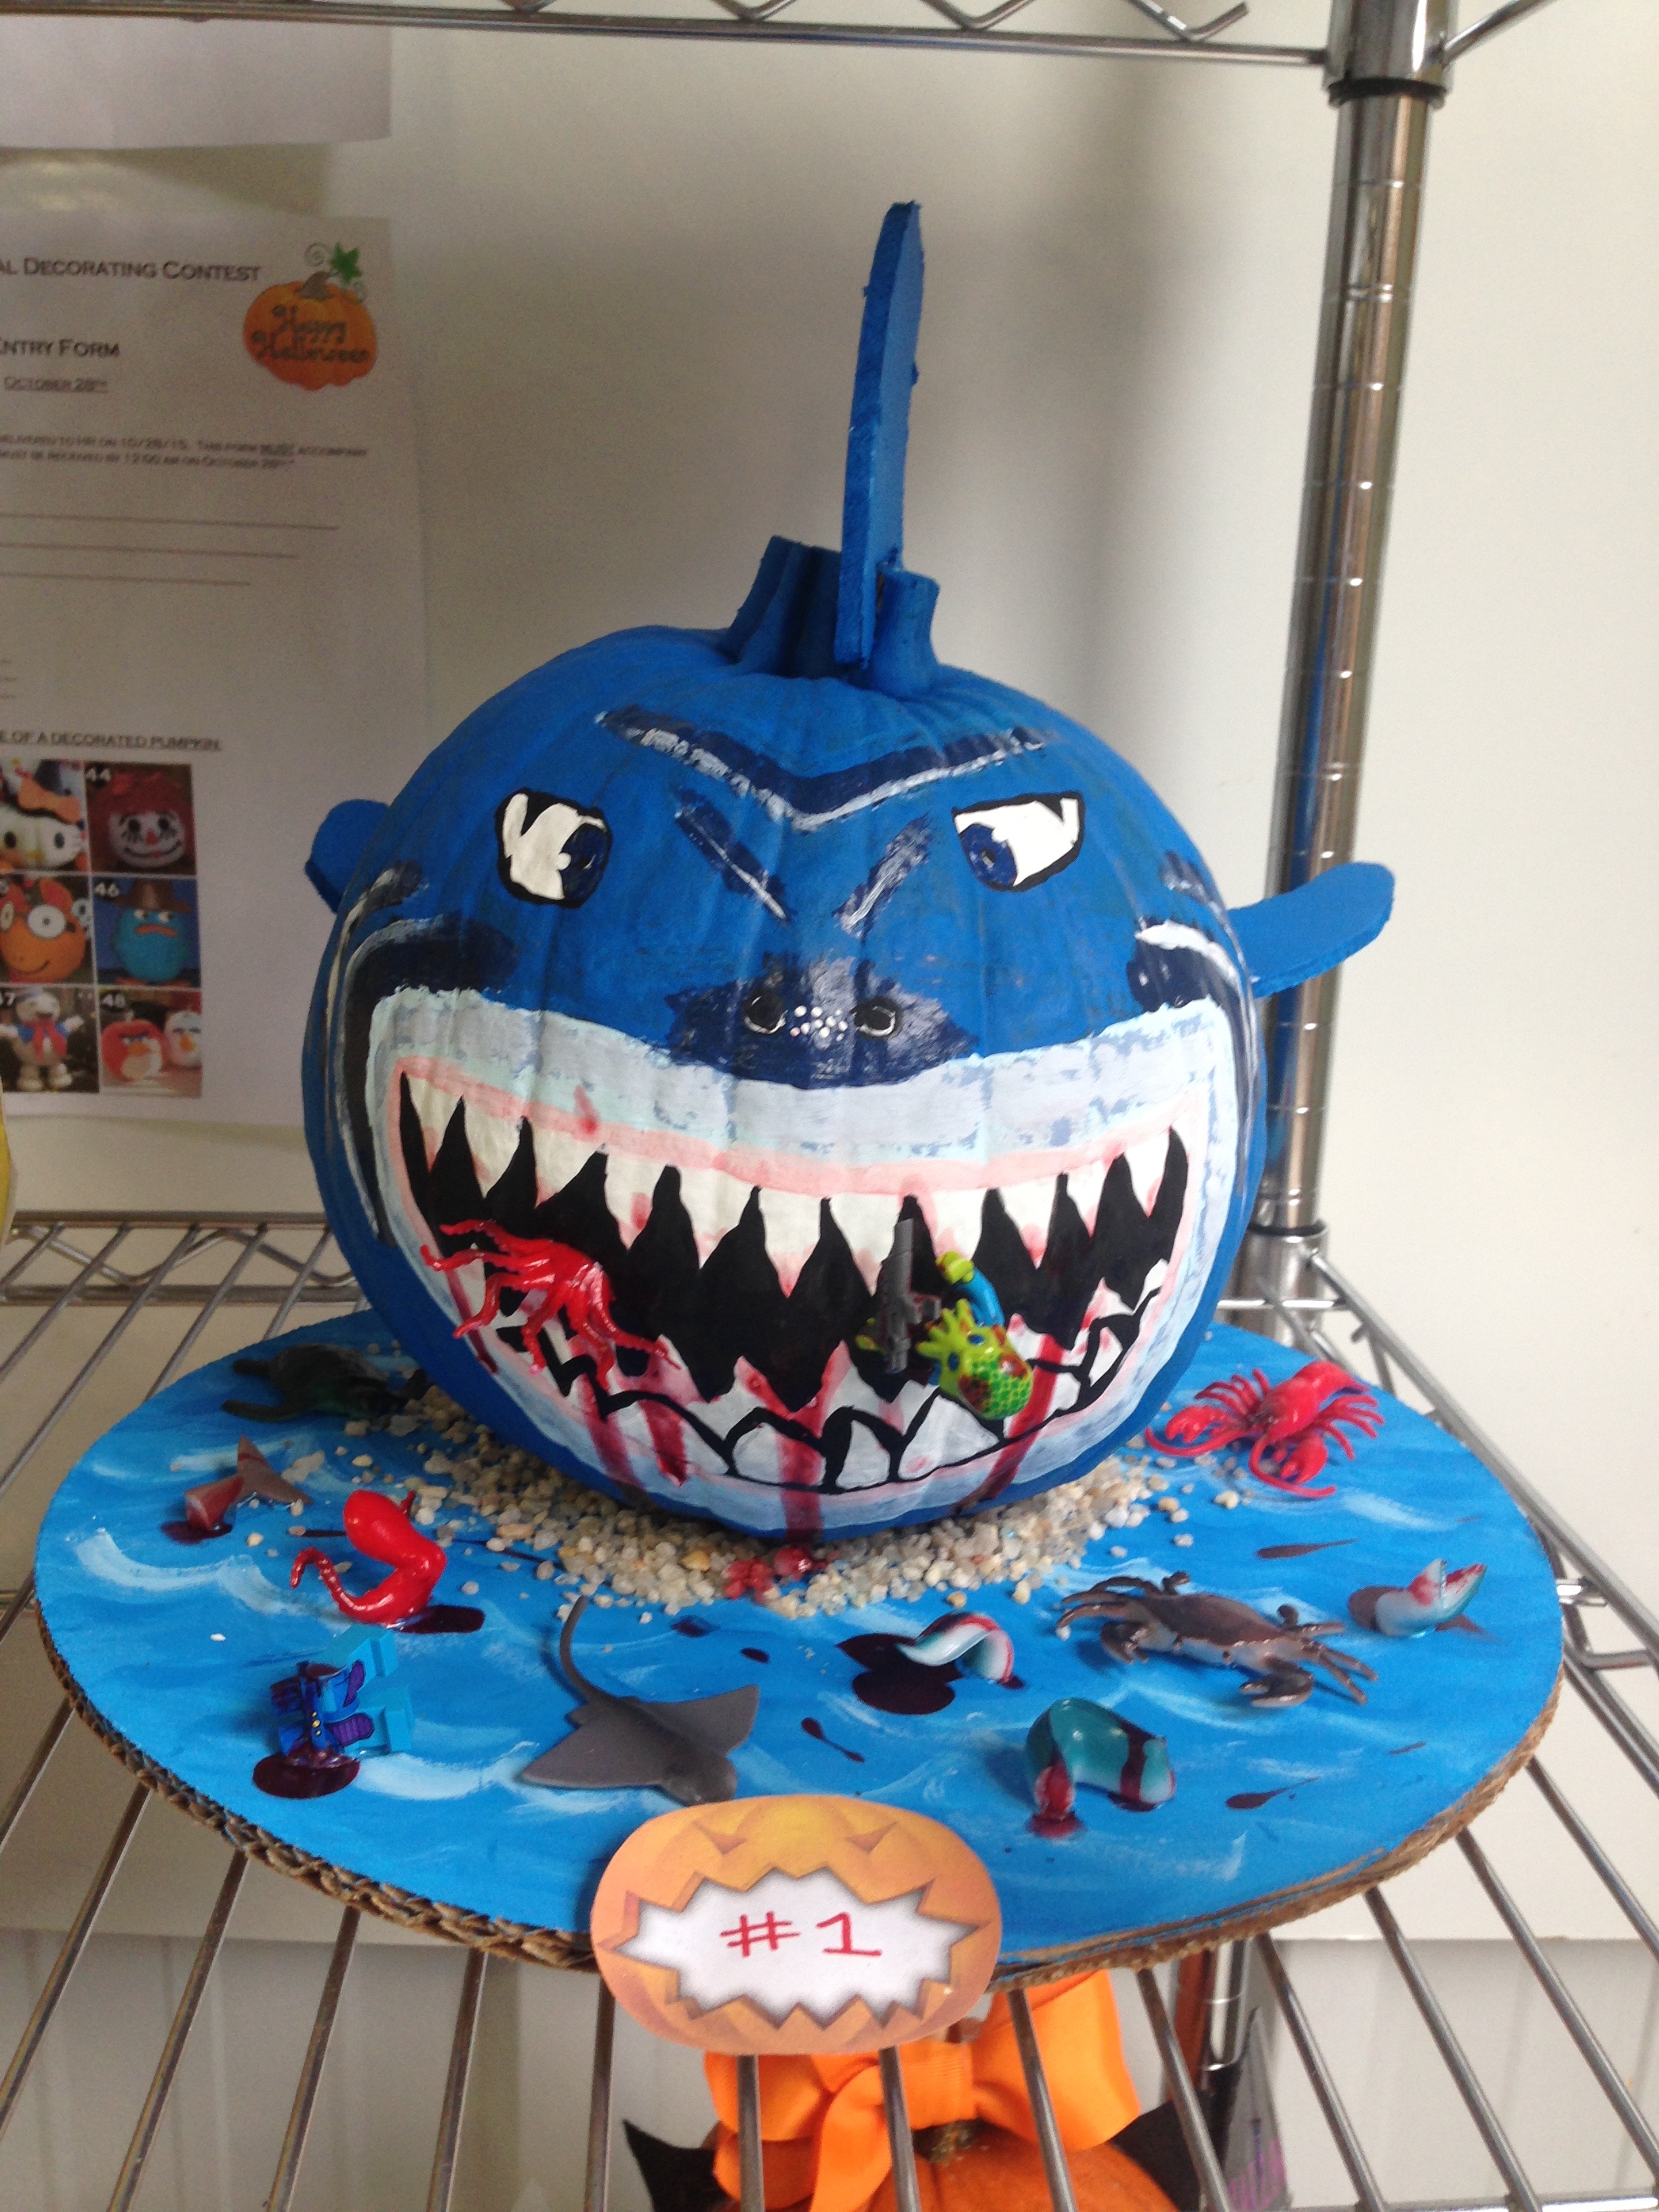 1st-annual-pumpkin-decorating-contest-texas-injection-molding